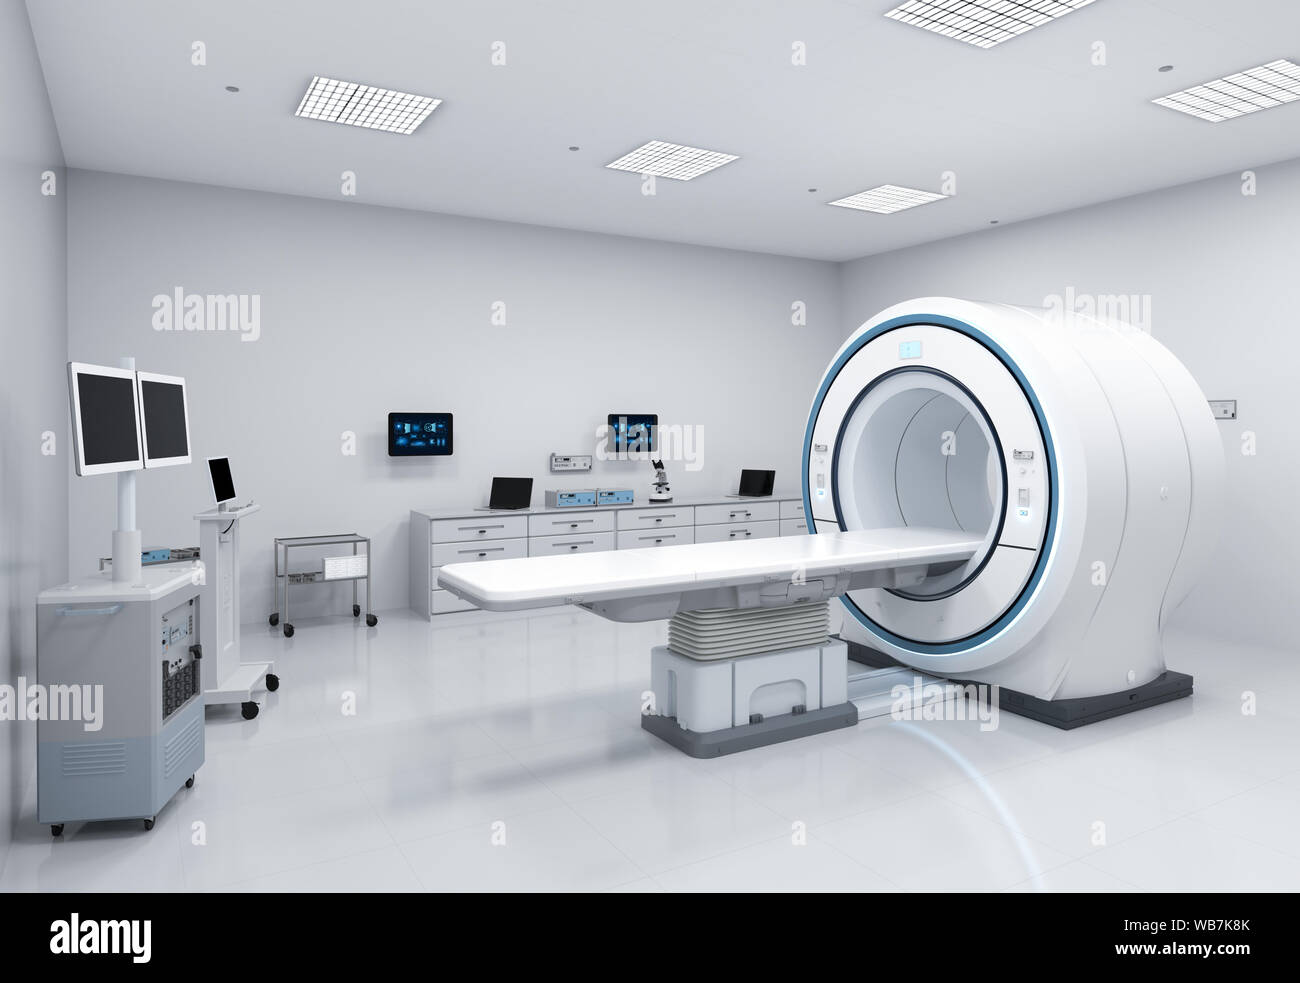 3d rendering mri scan machine or magnetic resonance imaging scan device  Stock Photo - Alamy